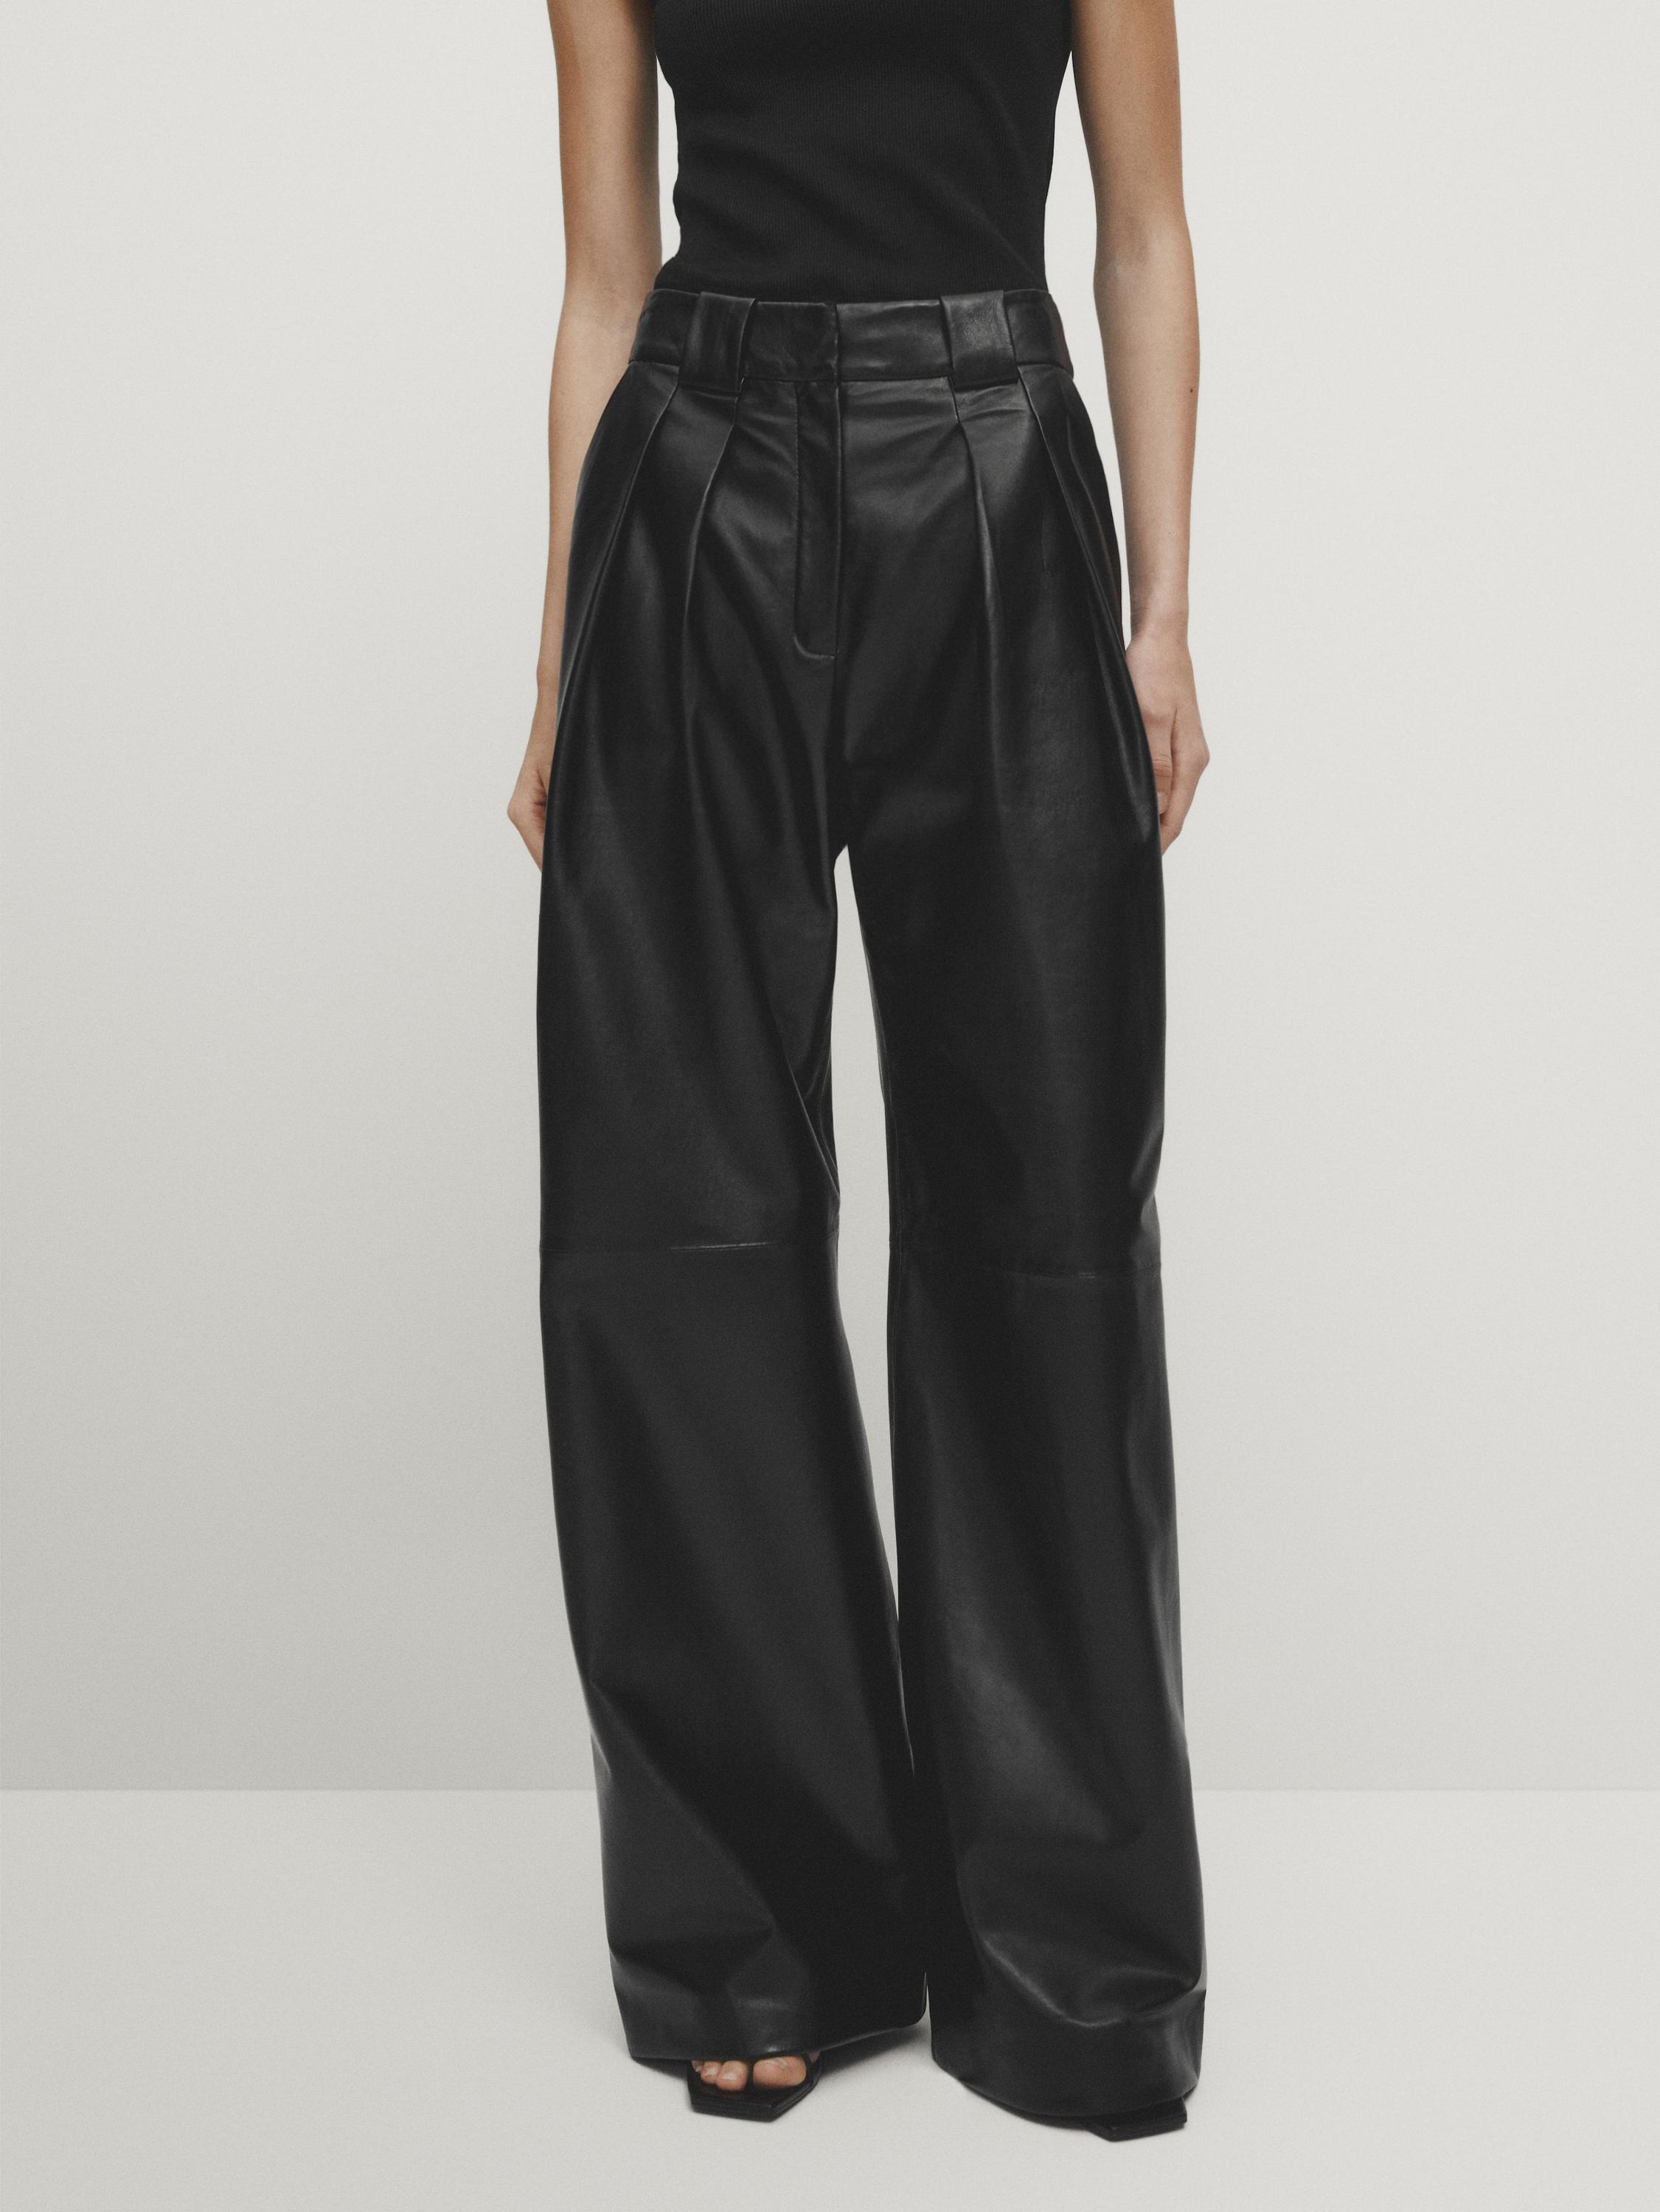 Zara Faux Leather High-Waisted Pants in Whiskey Size S 4387/432